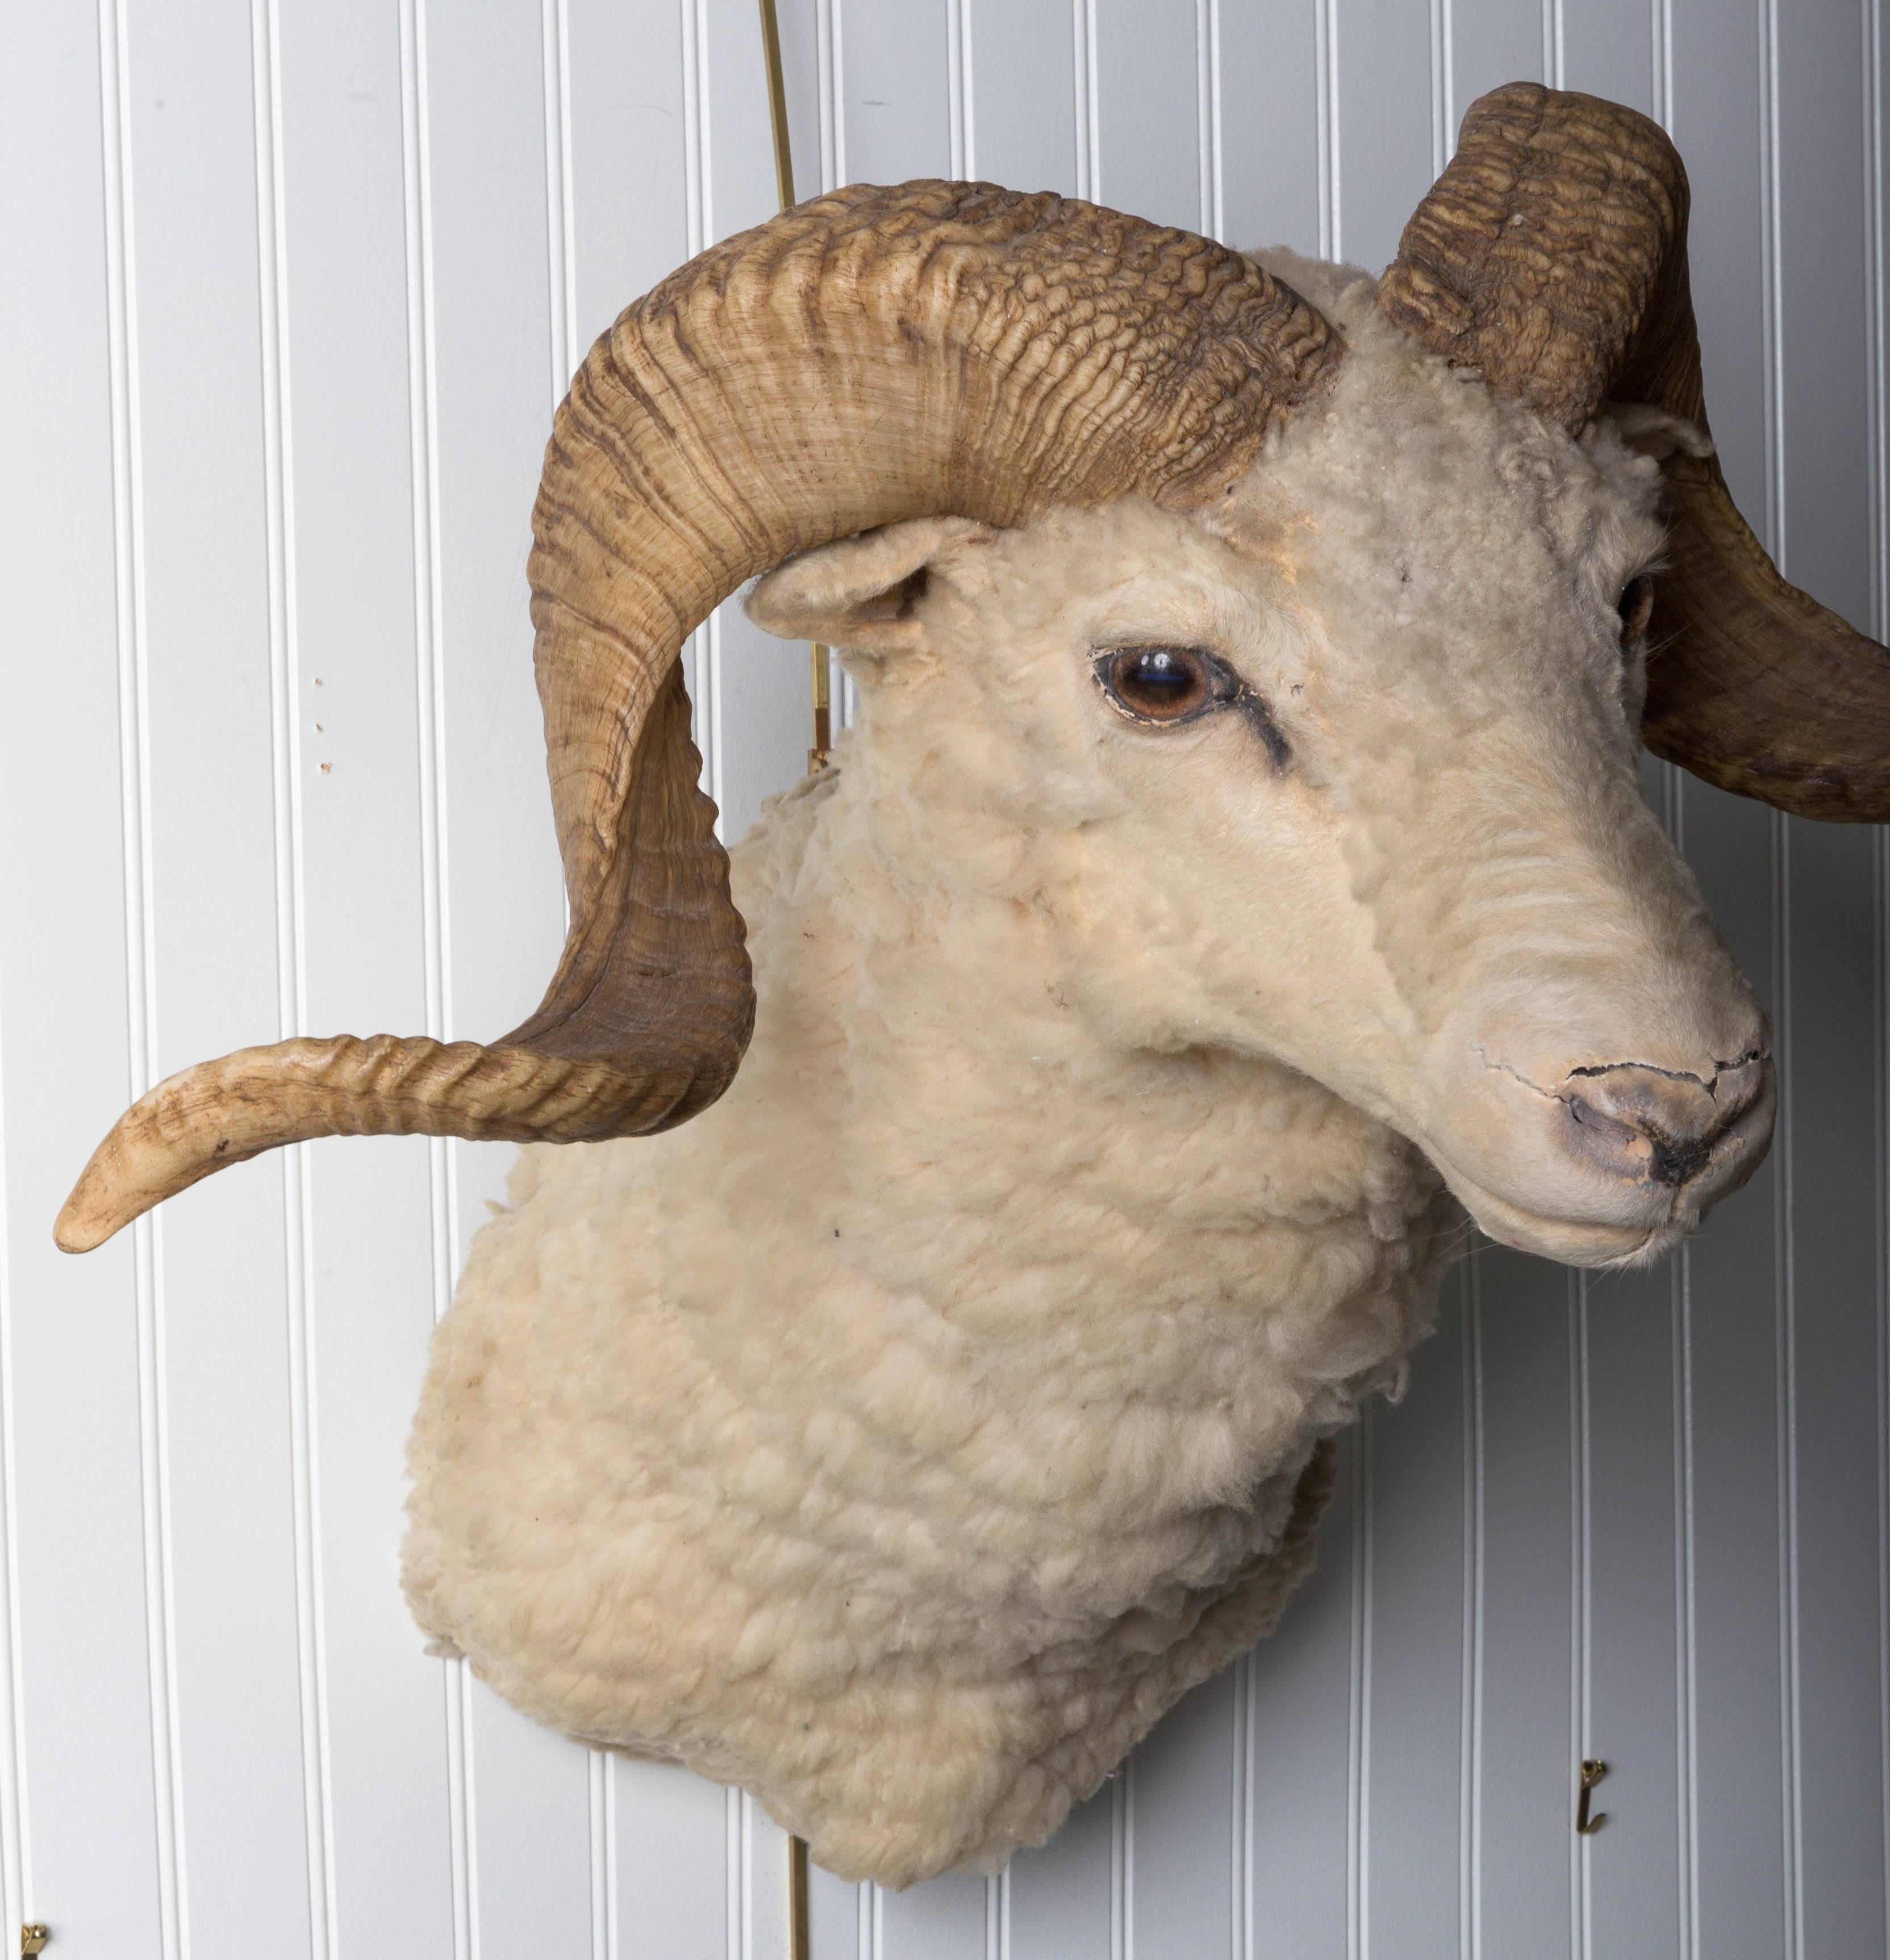 Rare Ram's head Vintage Taxidermy. Shoulder mount with wonderful horns. Minor cracks on nose due to age.